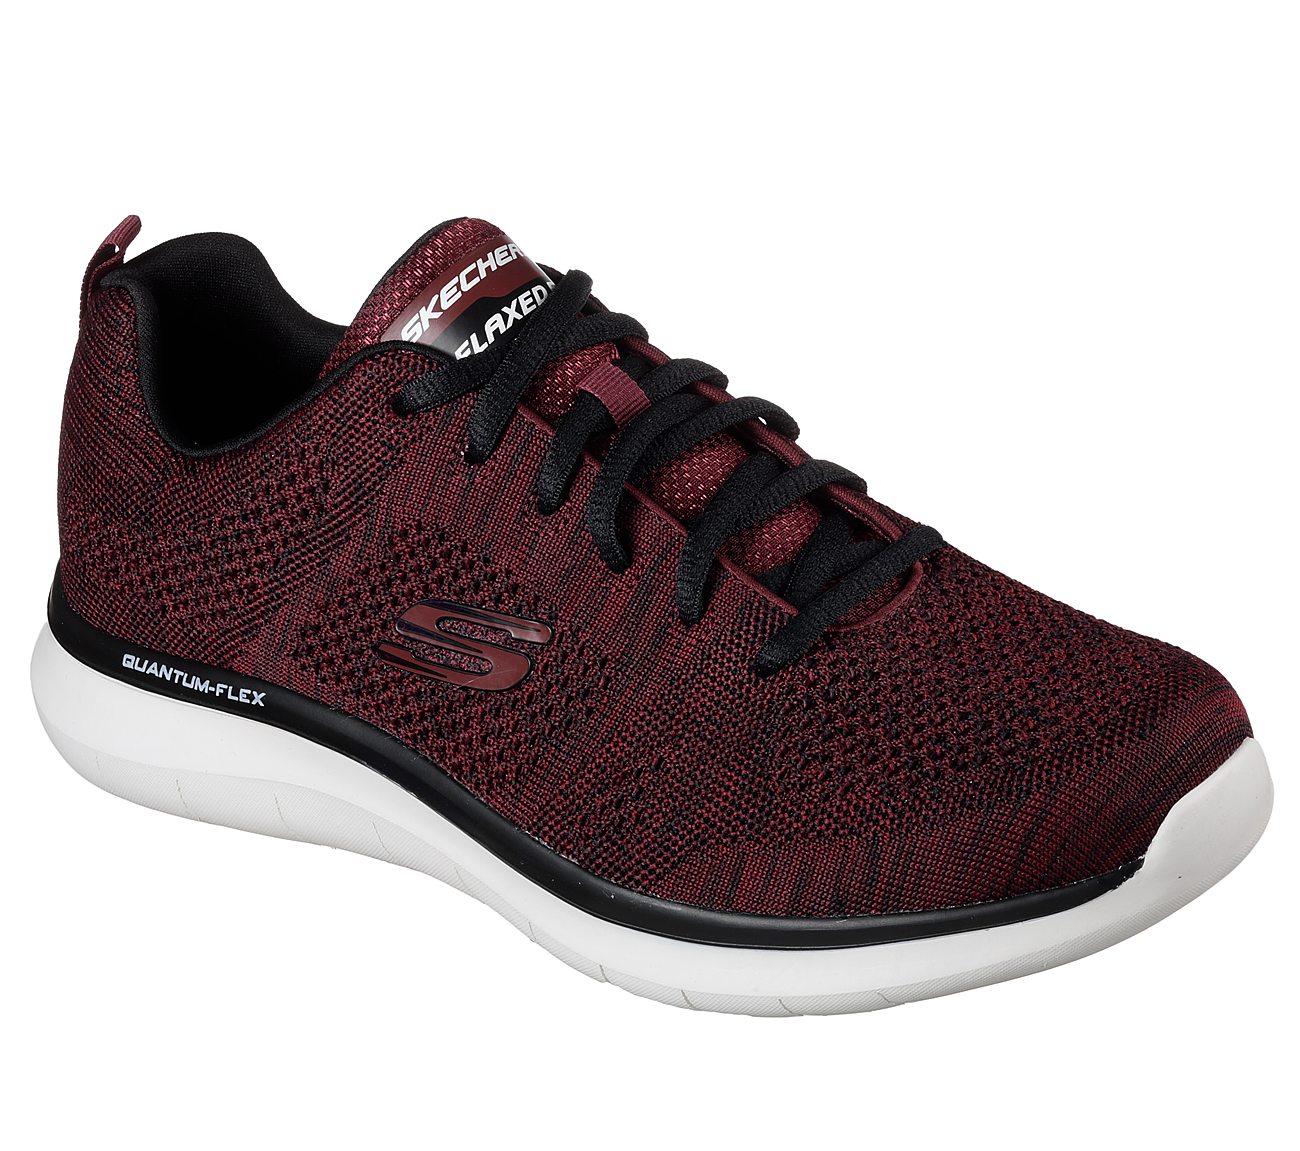 Buy SKECHERS Relaxed Fit: Quantum Flex - Smyzer Relaxed Fit Shoes